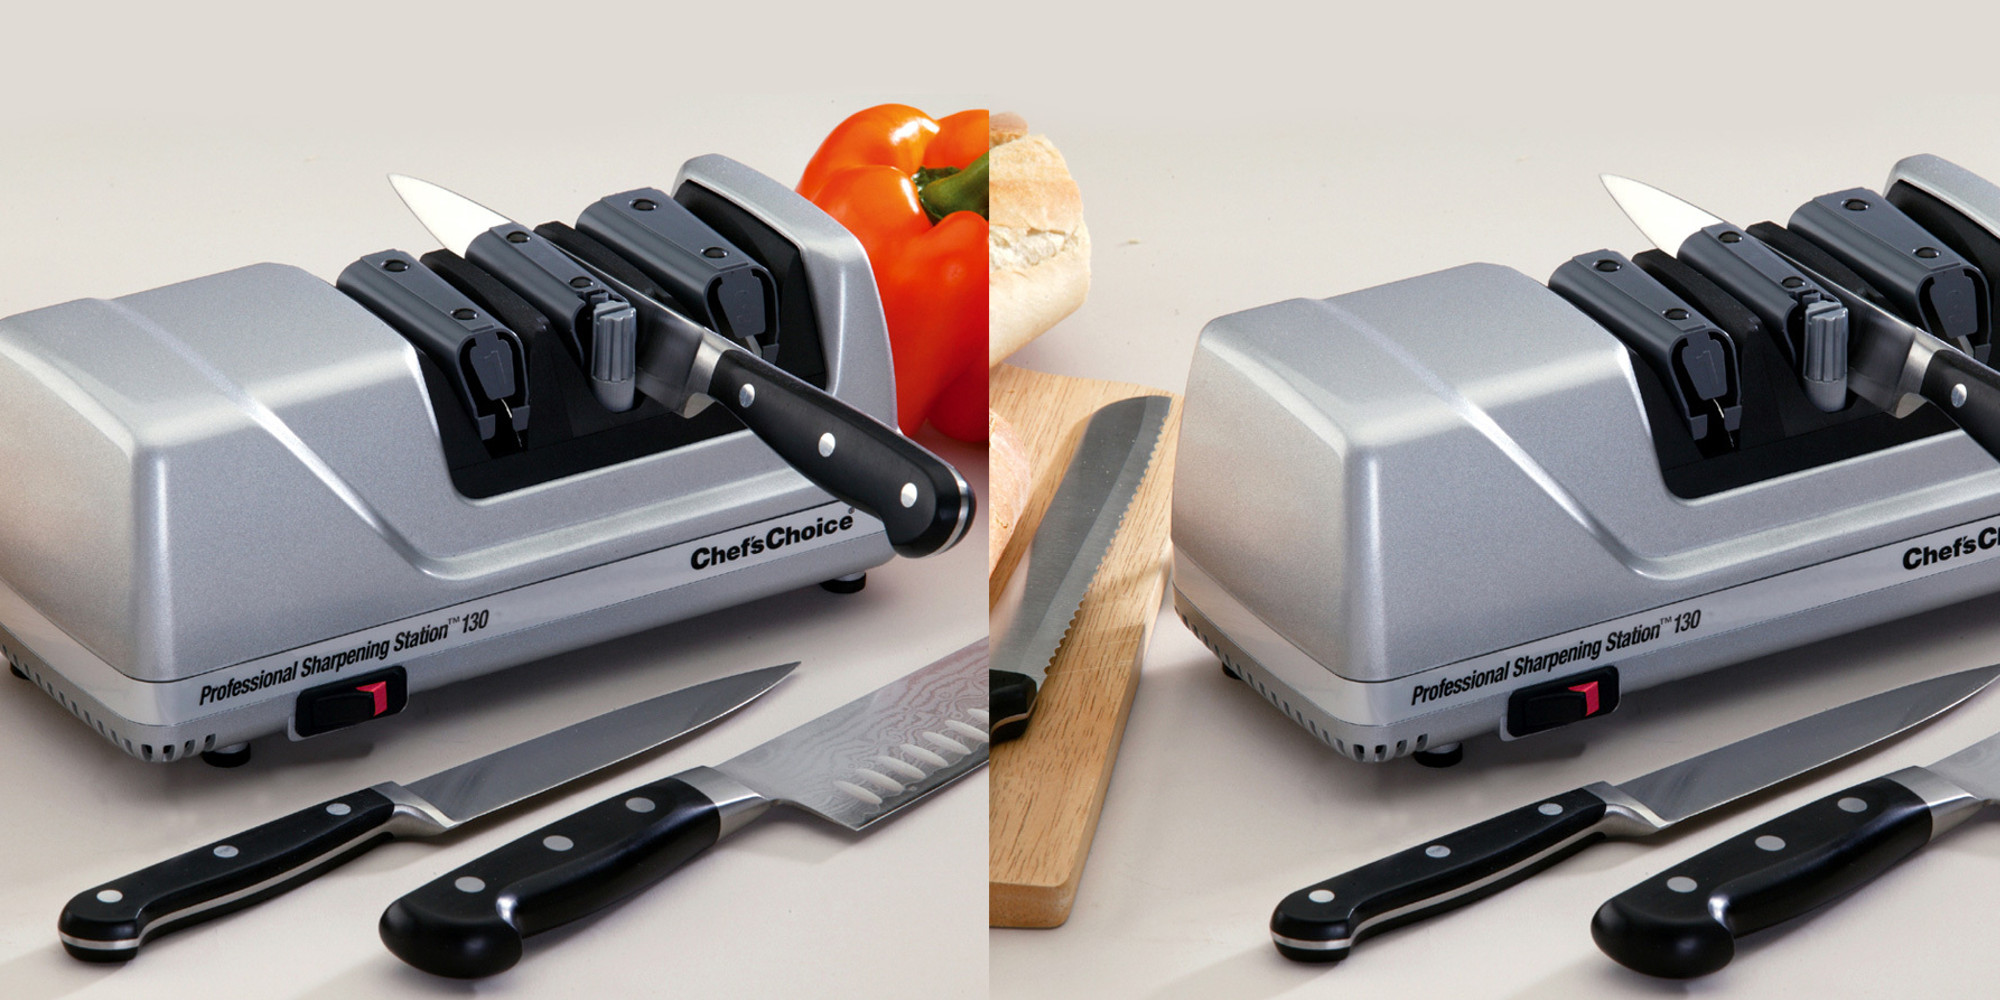 https://9to5toys.com/wp-content/uploads/sites/5/2019/05/Chefs-Choice-130-Professional-Knife-Sharpening-Station-Platinum.jpg